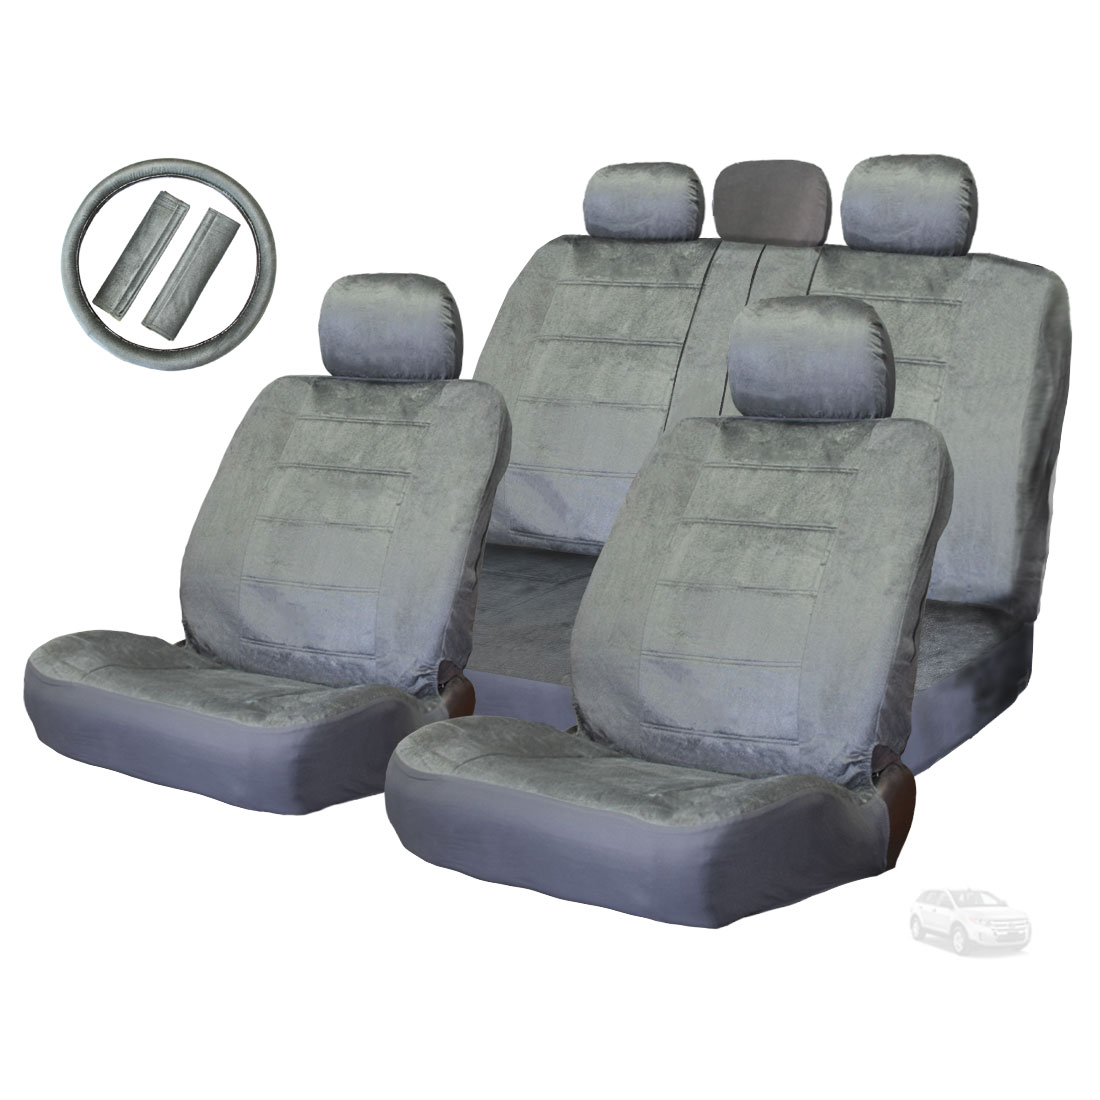 New Semi Custom Premium Grade Grey Velour Car Truck Seat and Steering Wheel Covers Full Set No Shipping Cost - image 1 of 4